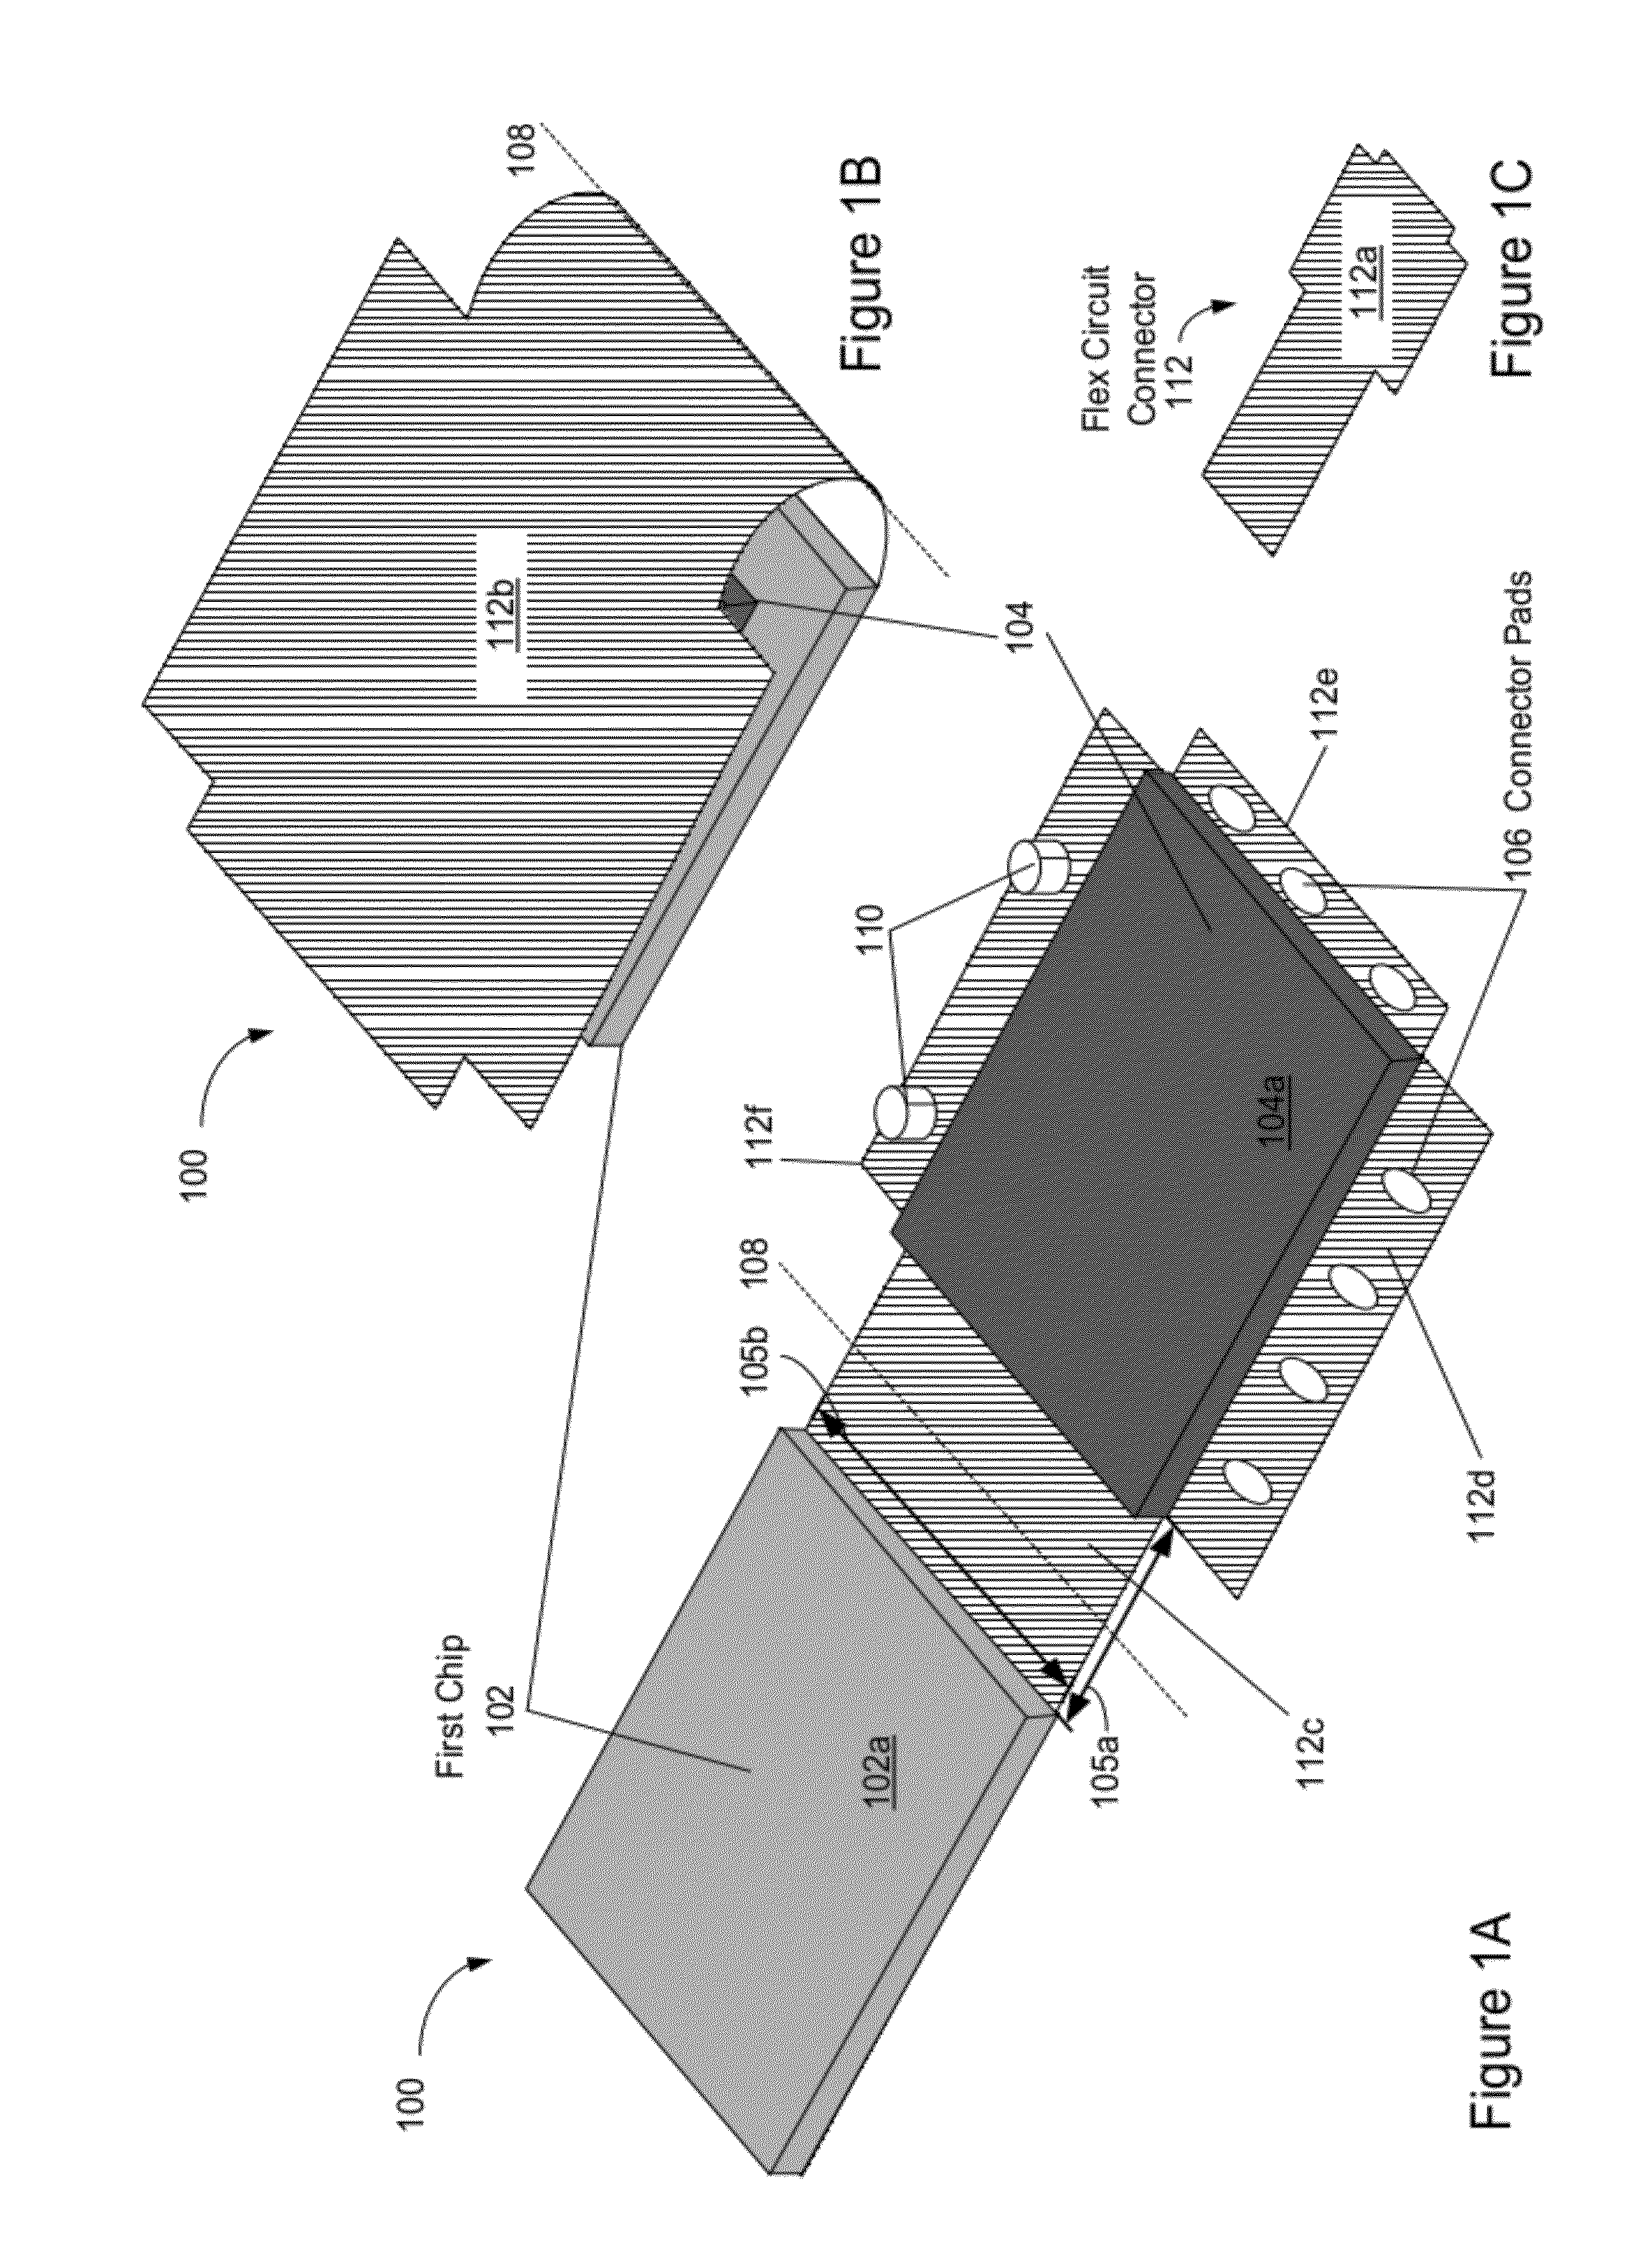 Compact folded configuration for integrated circuit packaging